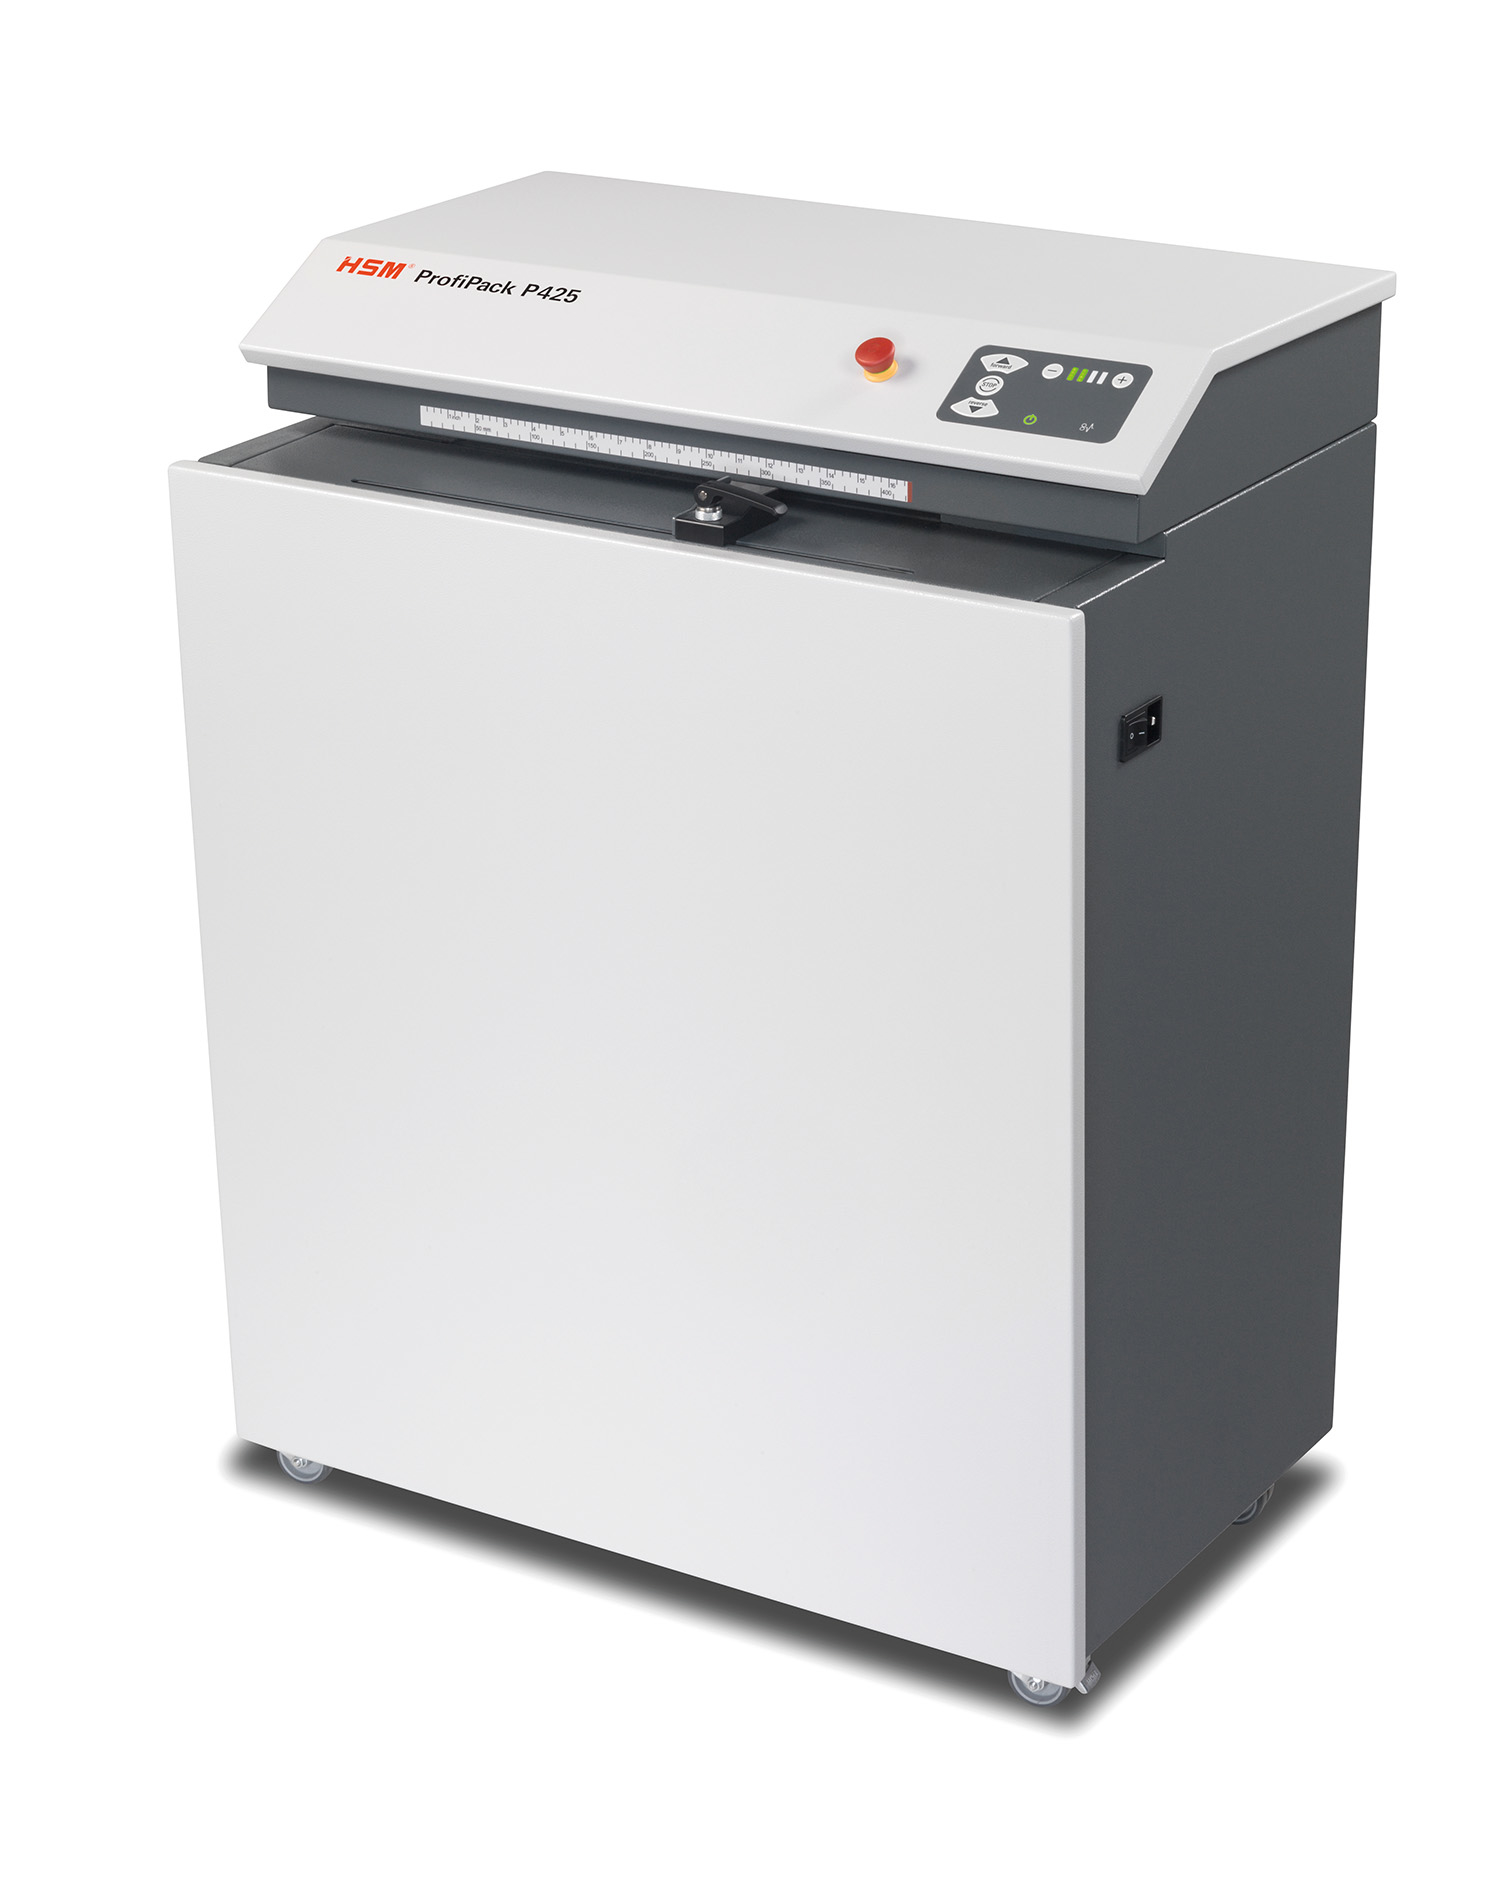 HSM Machine de calage d'emballage 1531054 ProfiPack P425, inkl. Ad. ProfiPack P425, inkl. Ad.